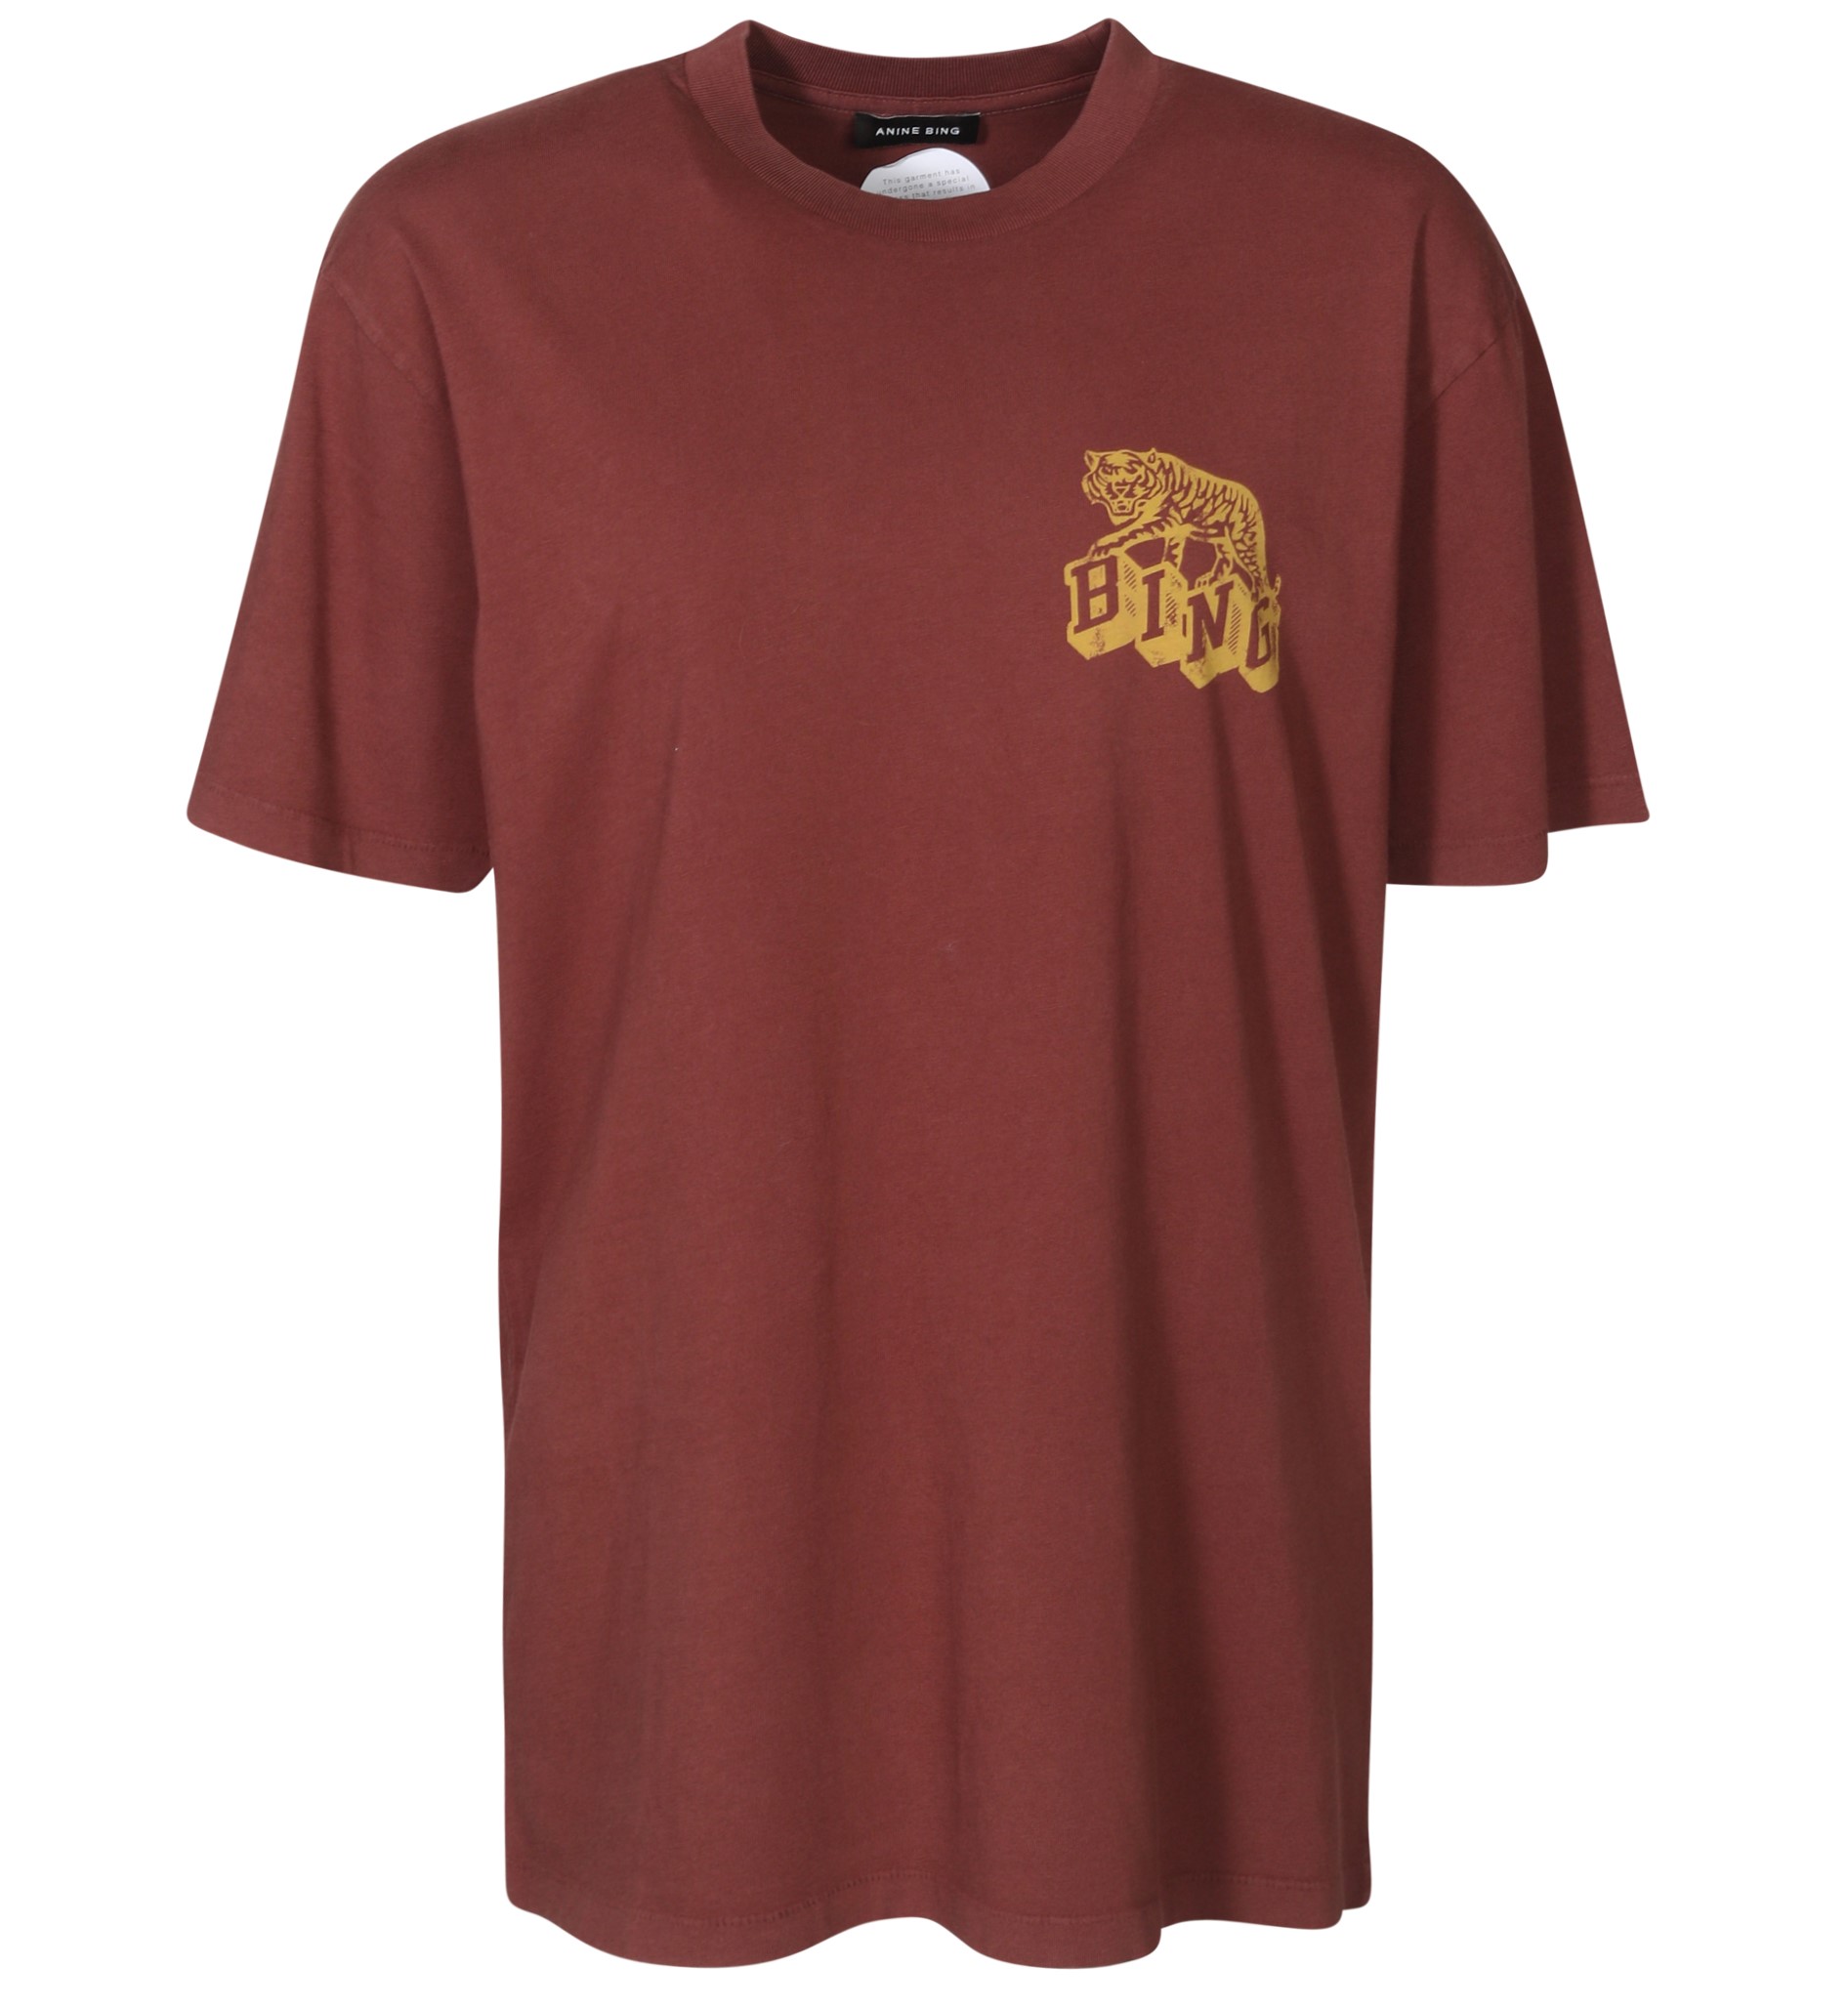 ANINE BING Walker Tee Retro Tiger in Washed Faded Cherry XS